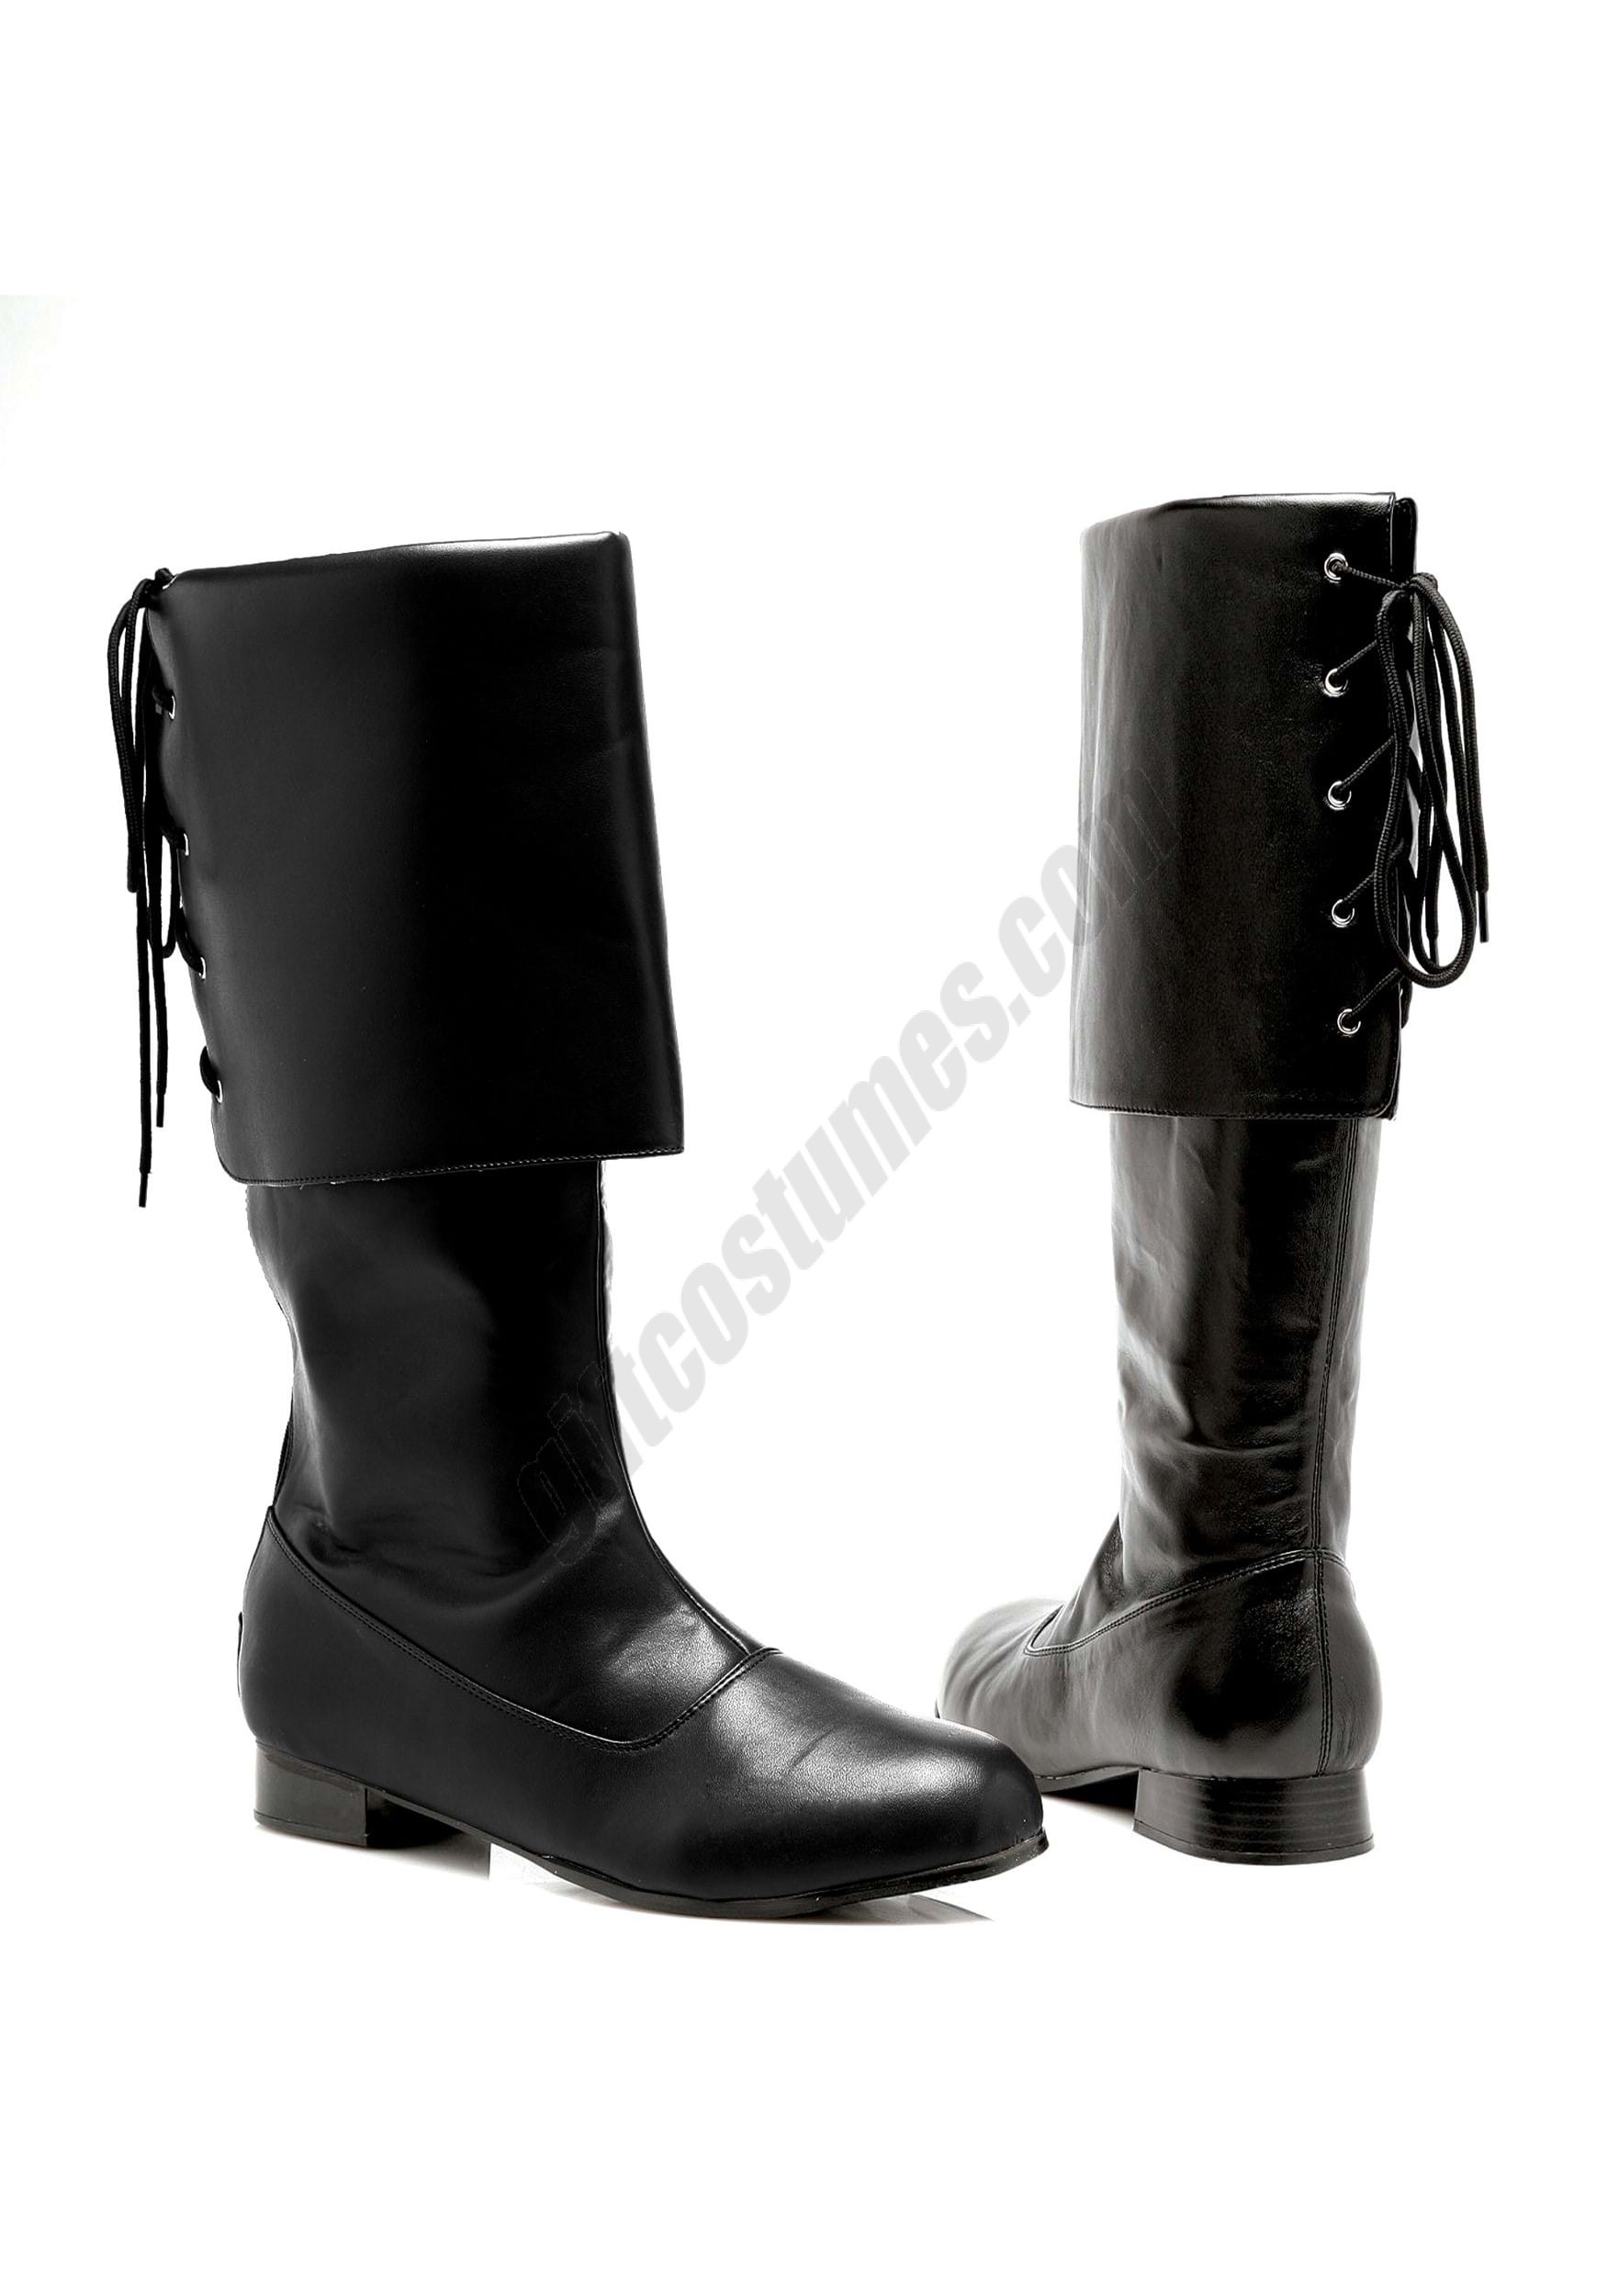 Black Women's Pirate Boots Promotions - Black Women's Pirate Boots Promotions